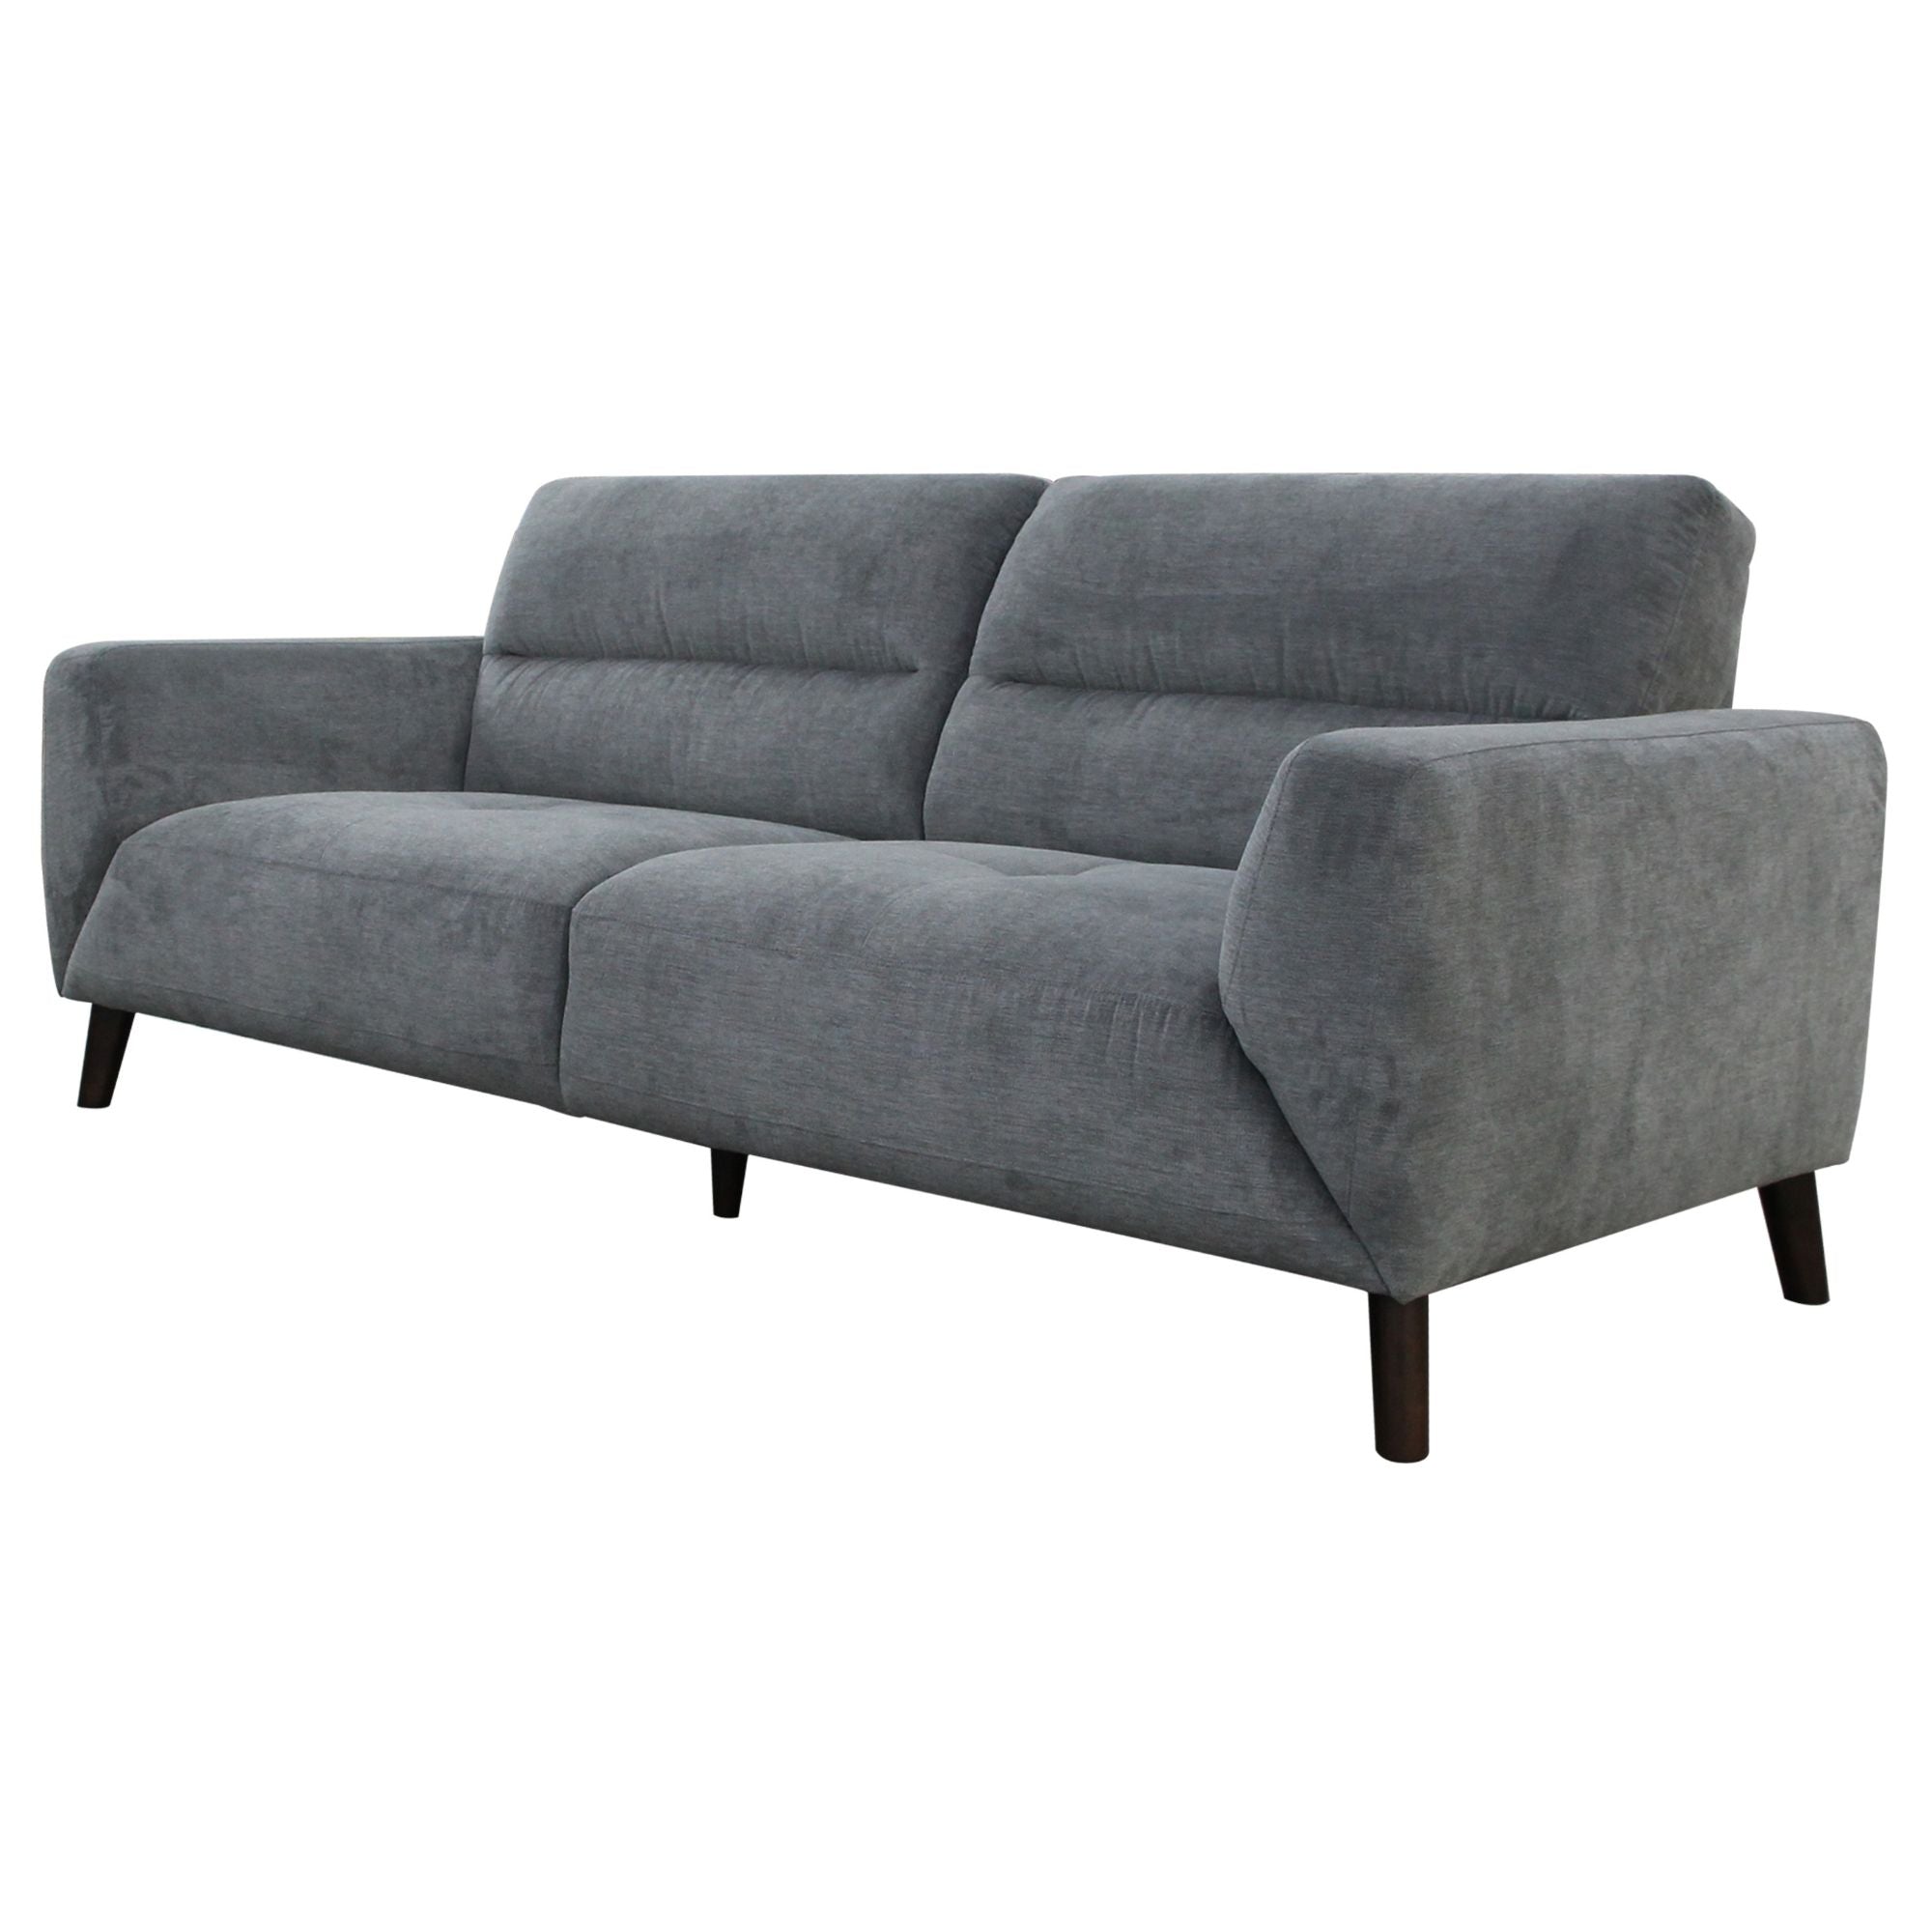 Monarch 2pc 2 + 3 Seater Sofa Set Fabric Uplholstered Lounge Couch - Charcoal